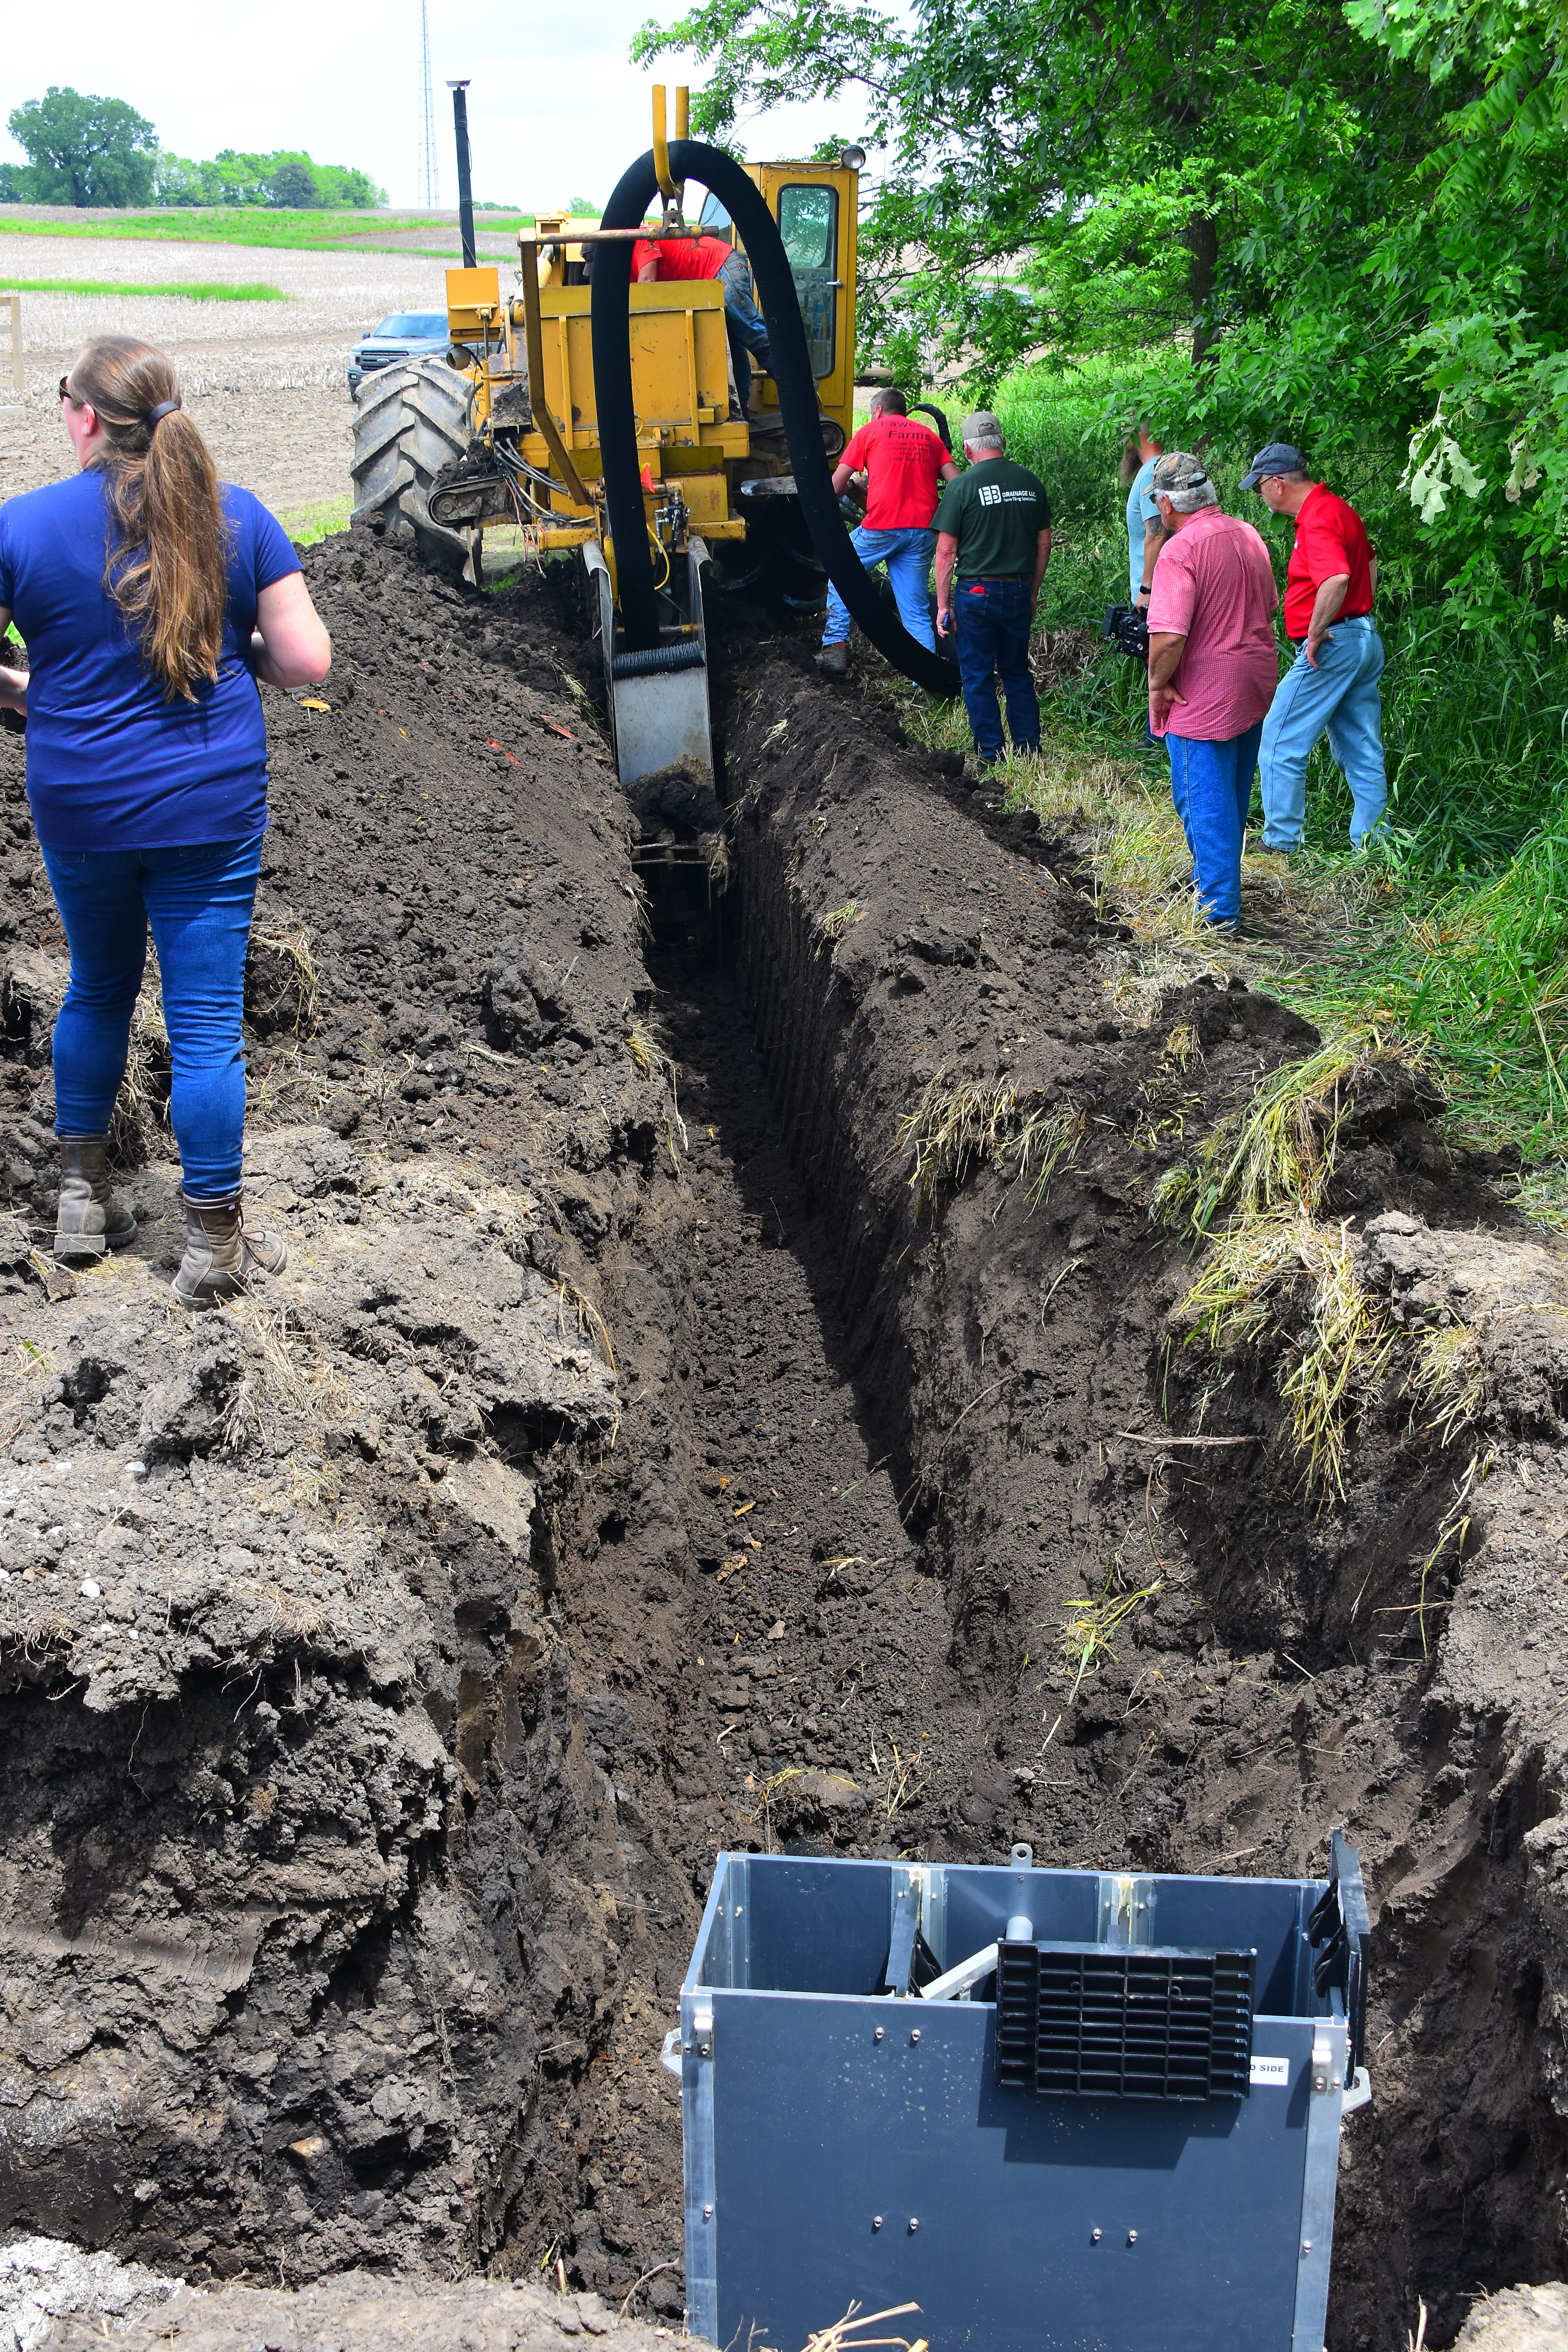 Digging a Saturated Buffer trench at the Fawcett Farm during their field day